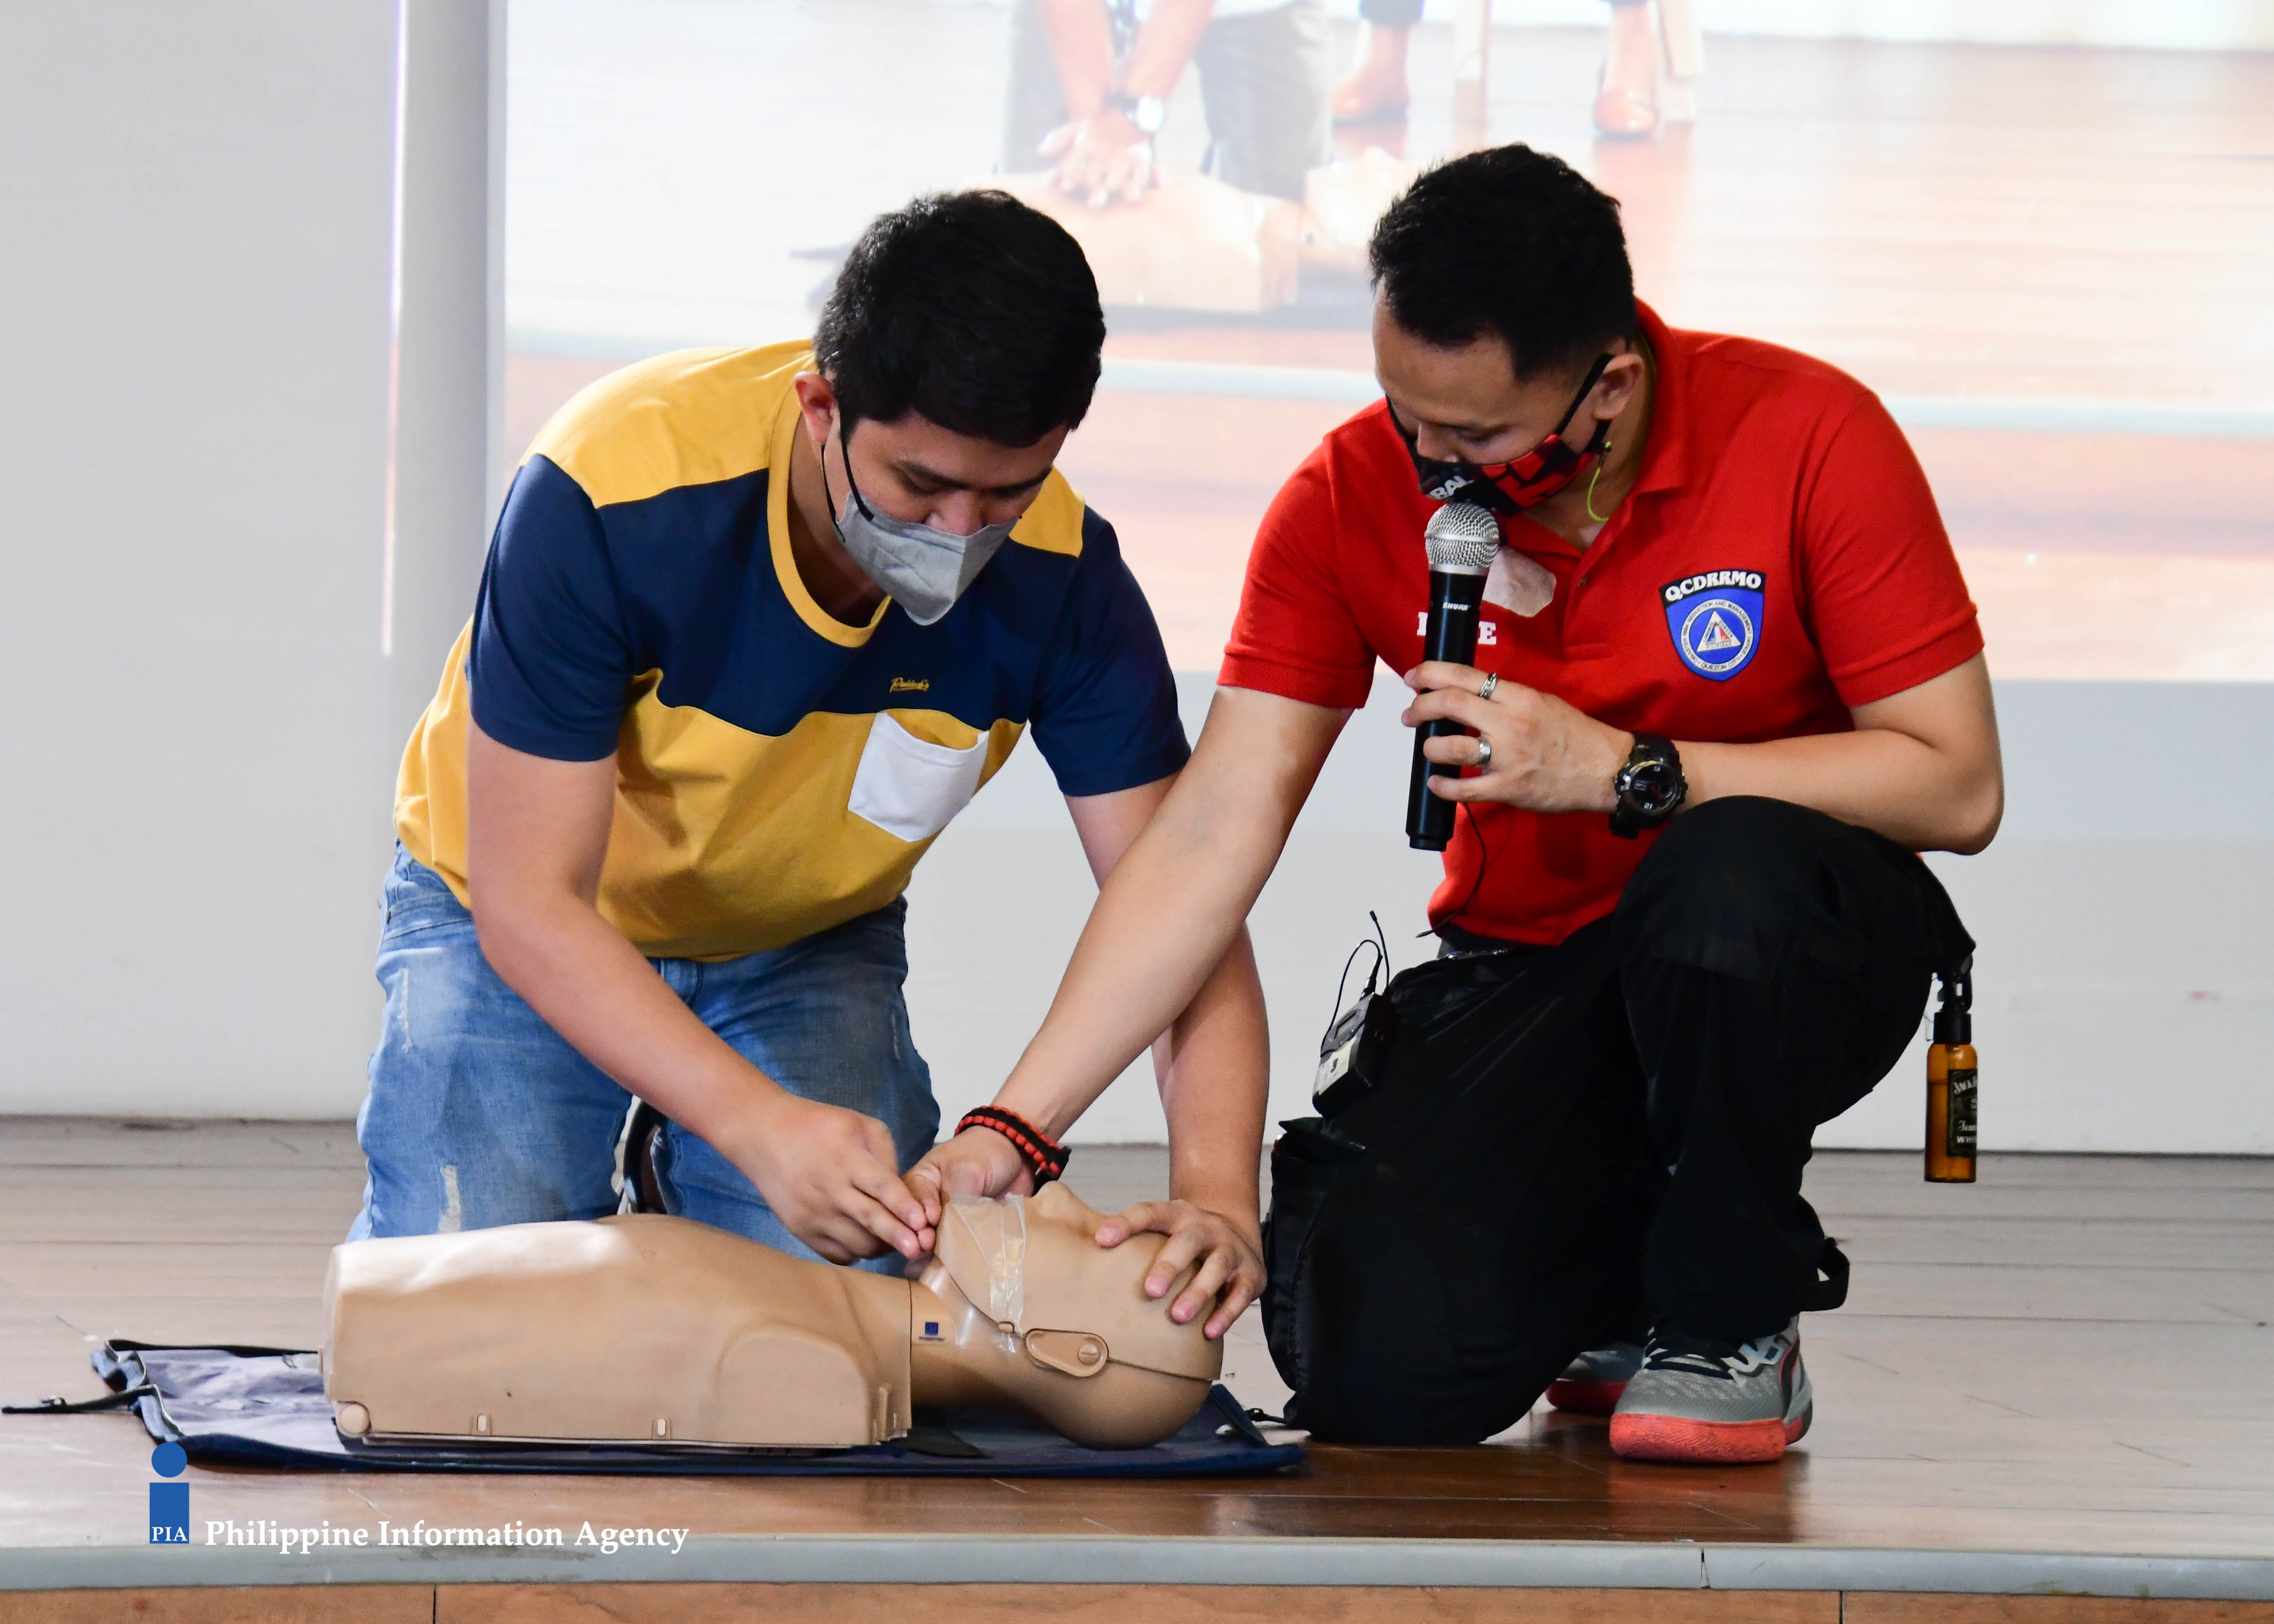 PIA employees gear up with Basic Life Support